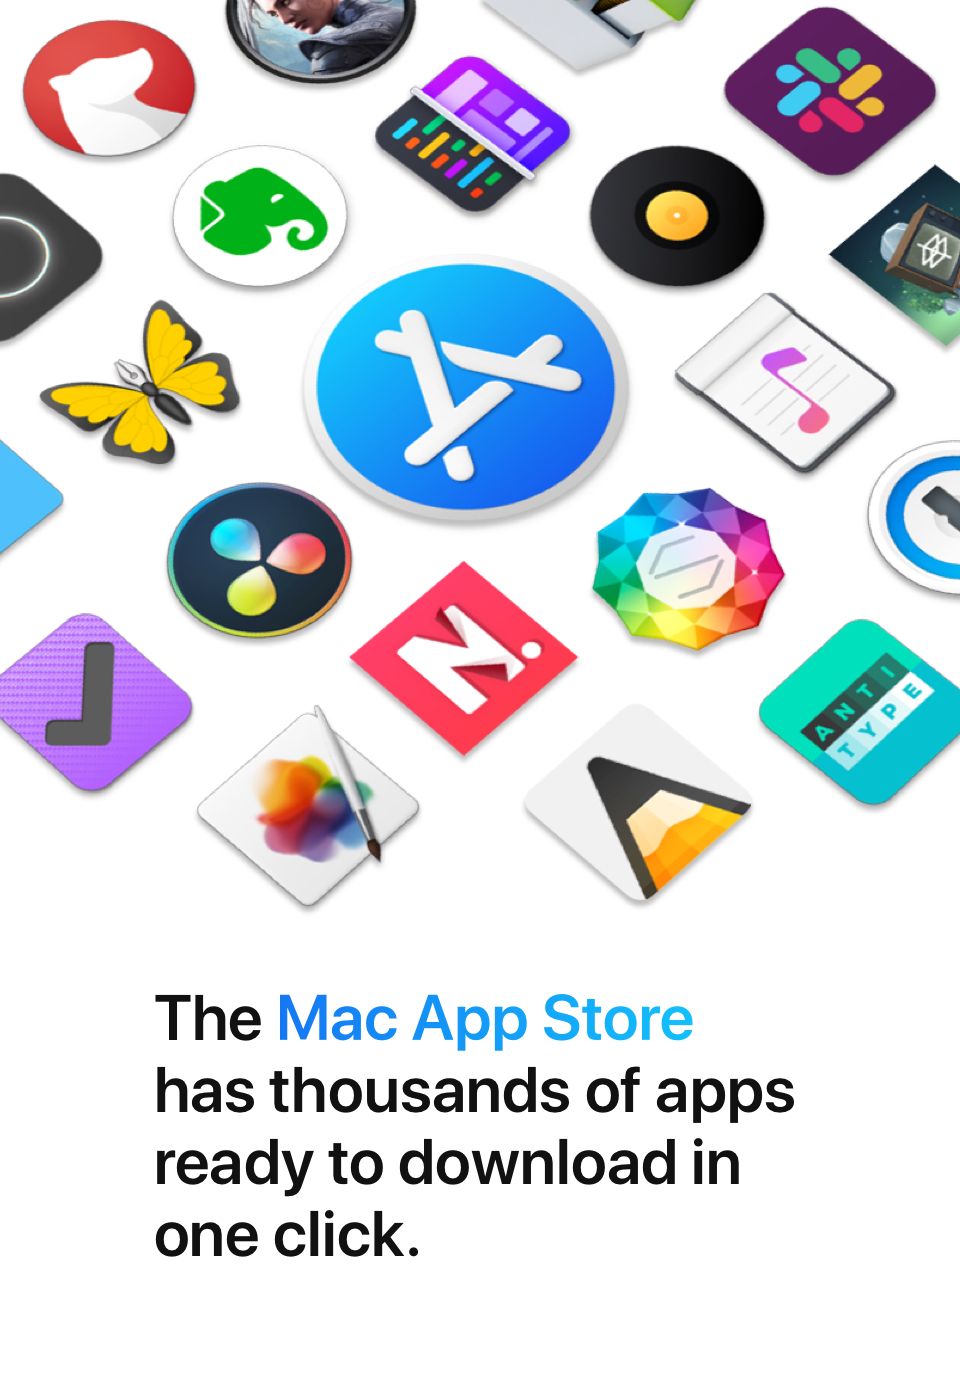 Mac has an App Store has thousands of apps ready to download in one click.